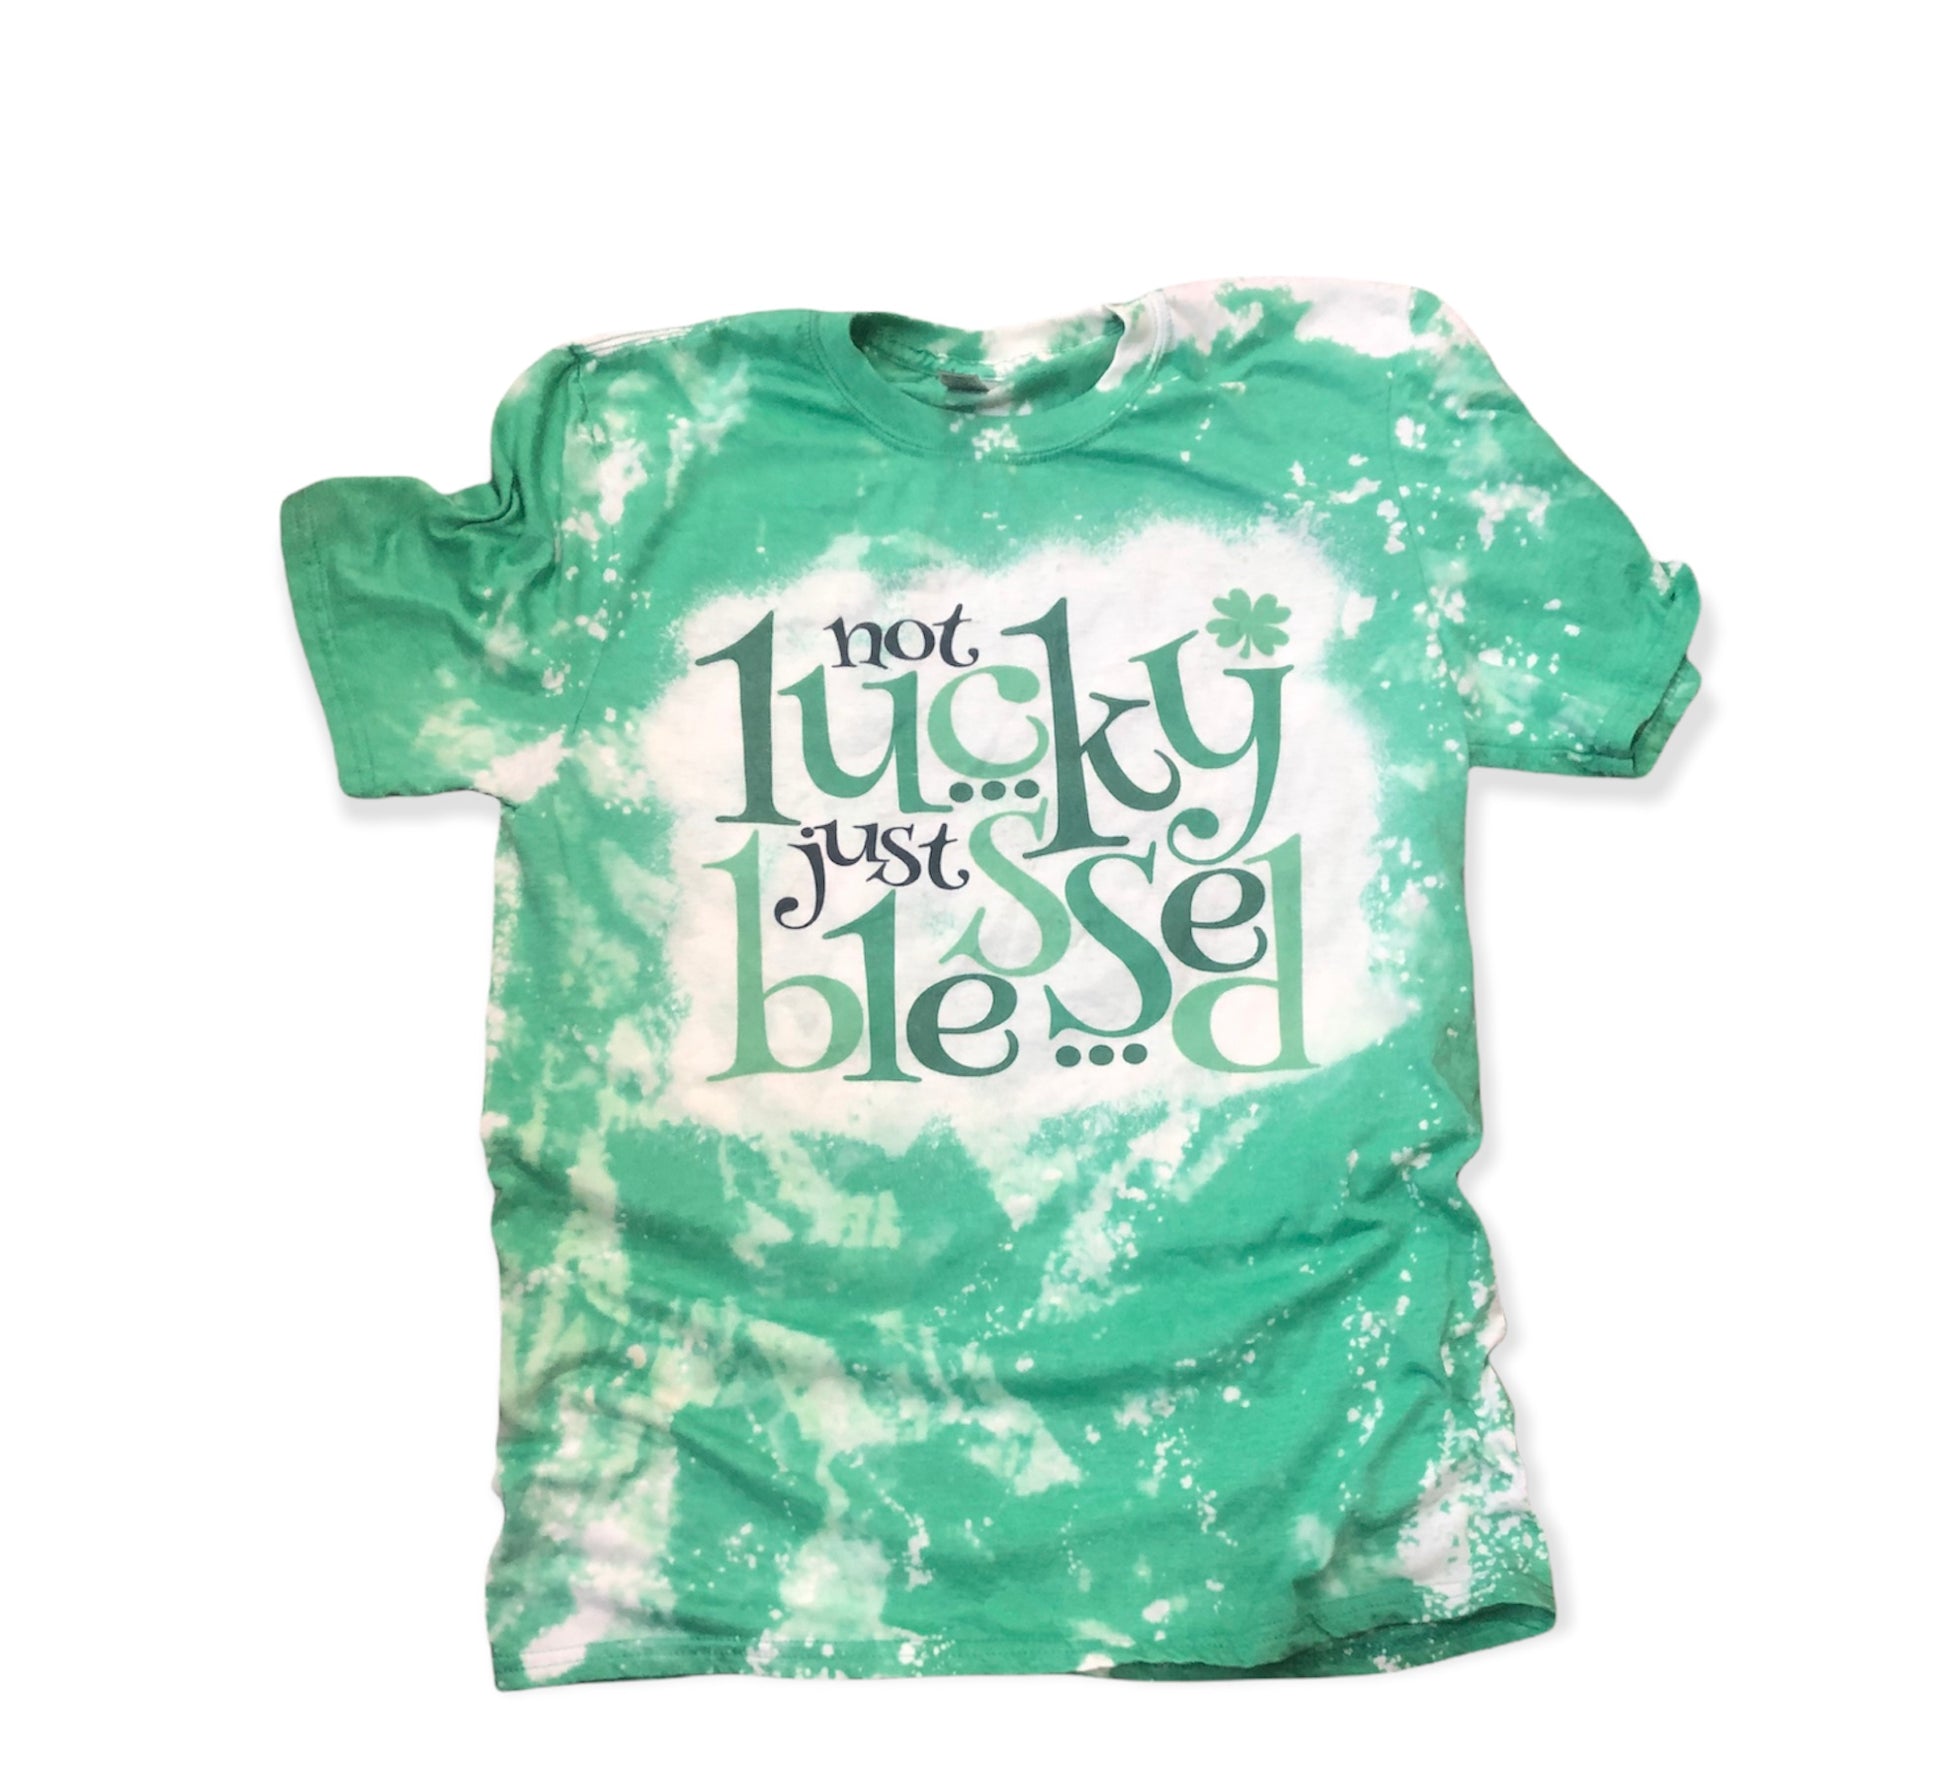 Not lucky just blessed St. Patrick's Day bleached tee green